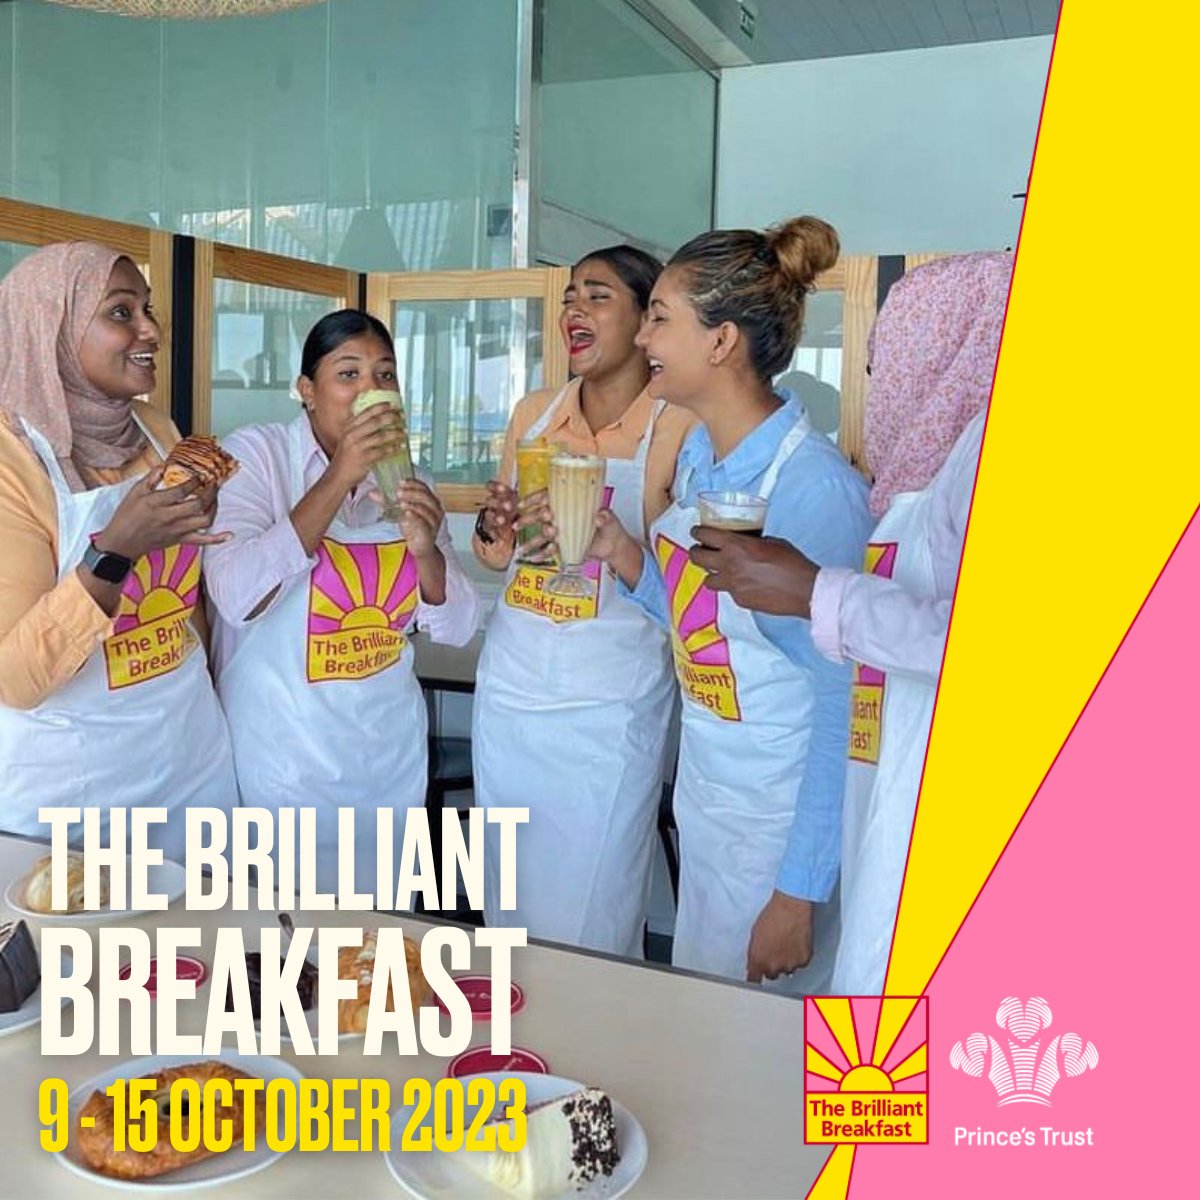 From pancakes and maple syrup to simple tea and toast, what’s on your Brilliant Breakfast table? ☕️ Whatever you serve, the funds you raise will support young women with the skills to move into work. Register to hold a Brilliant Breakfast today 👉 bit.ly/3OnOQEJ